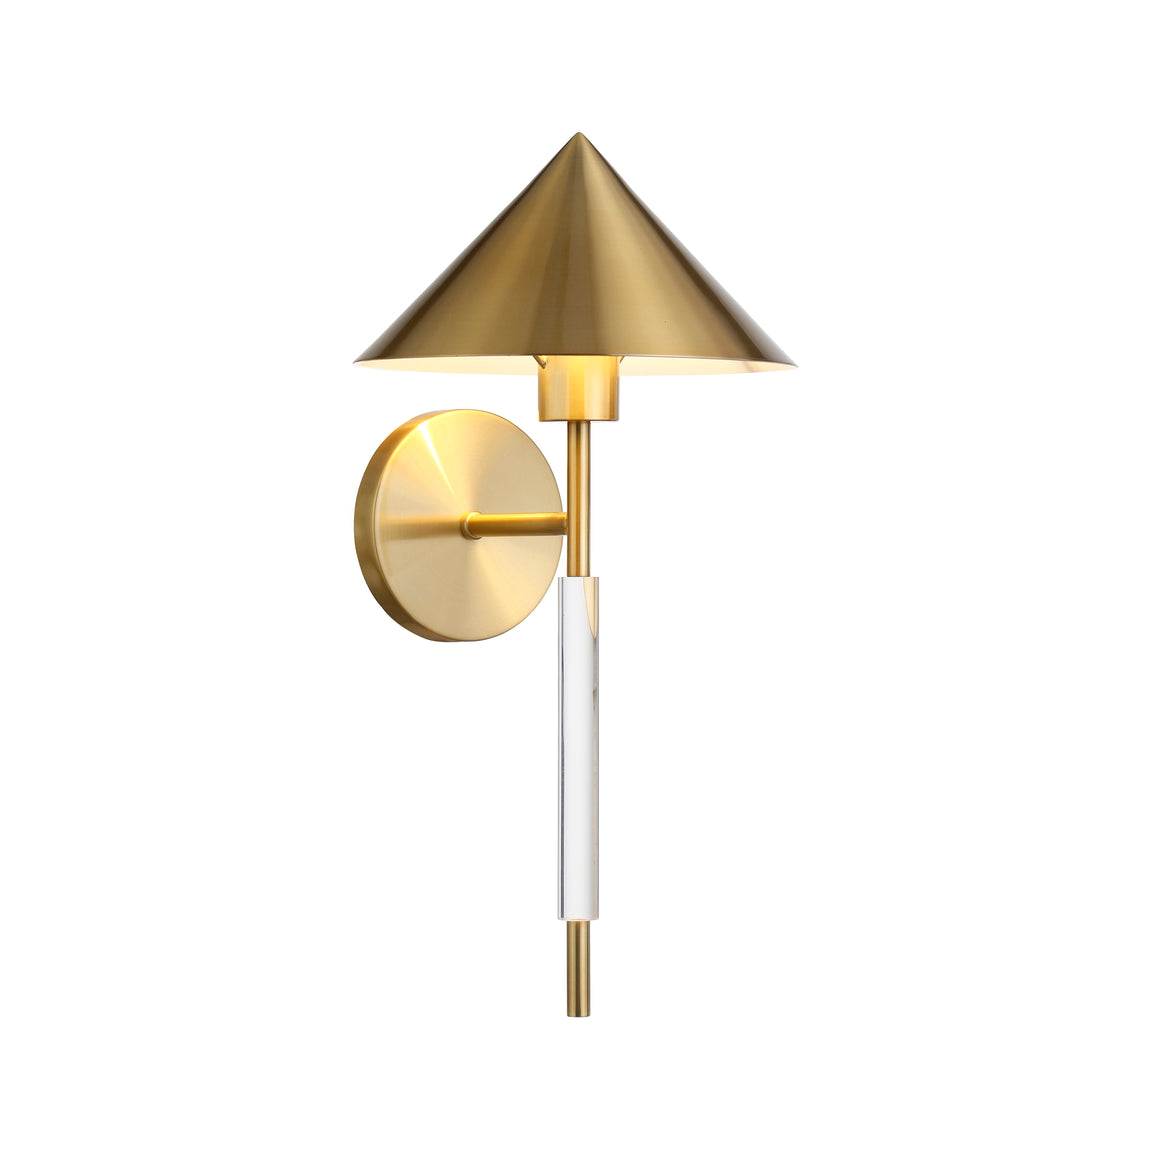 Scone with Acrylic Pole and Triangular Metal Shade in Antique Brass